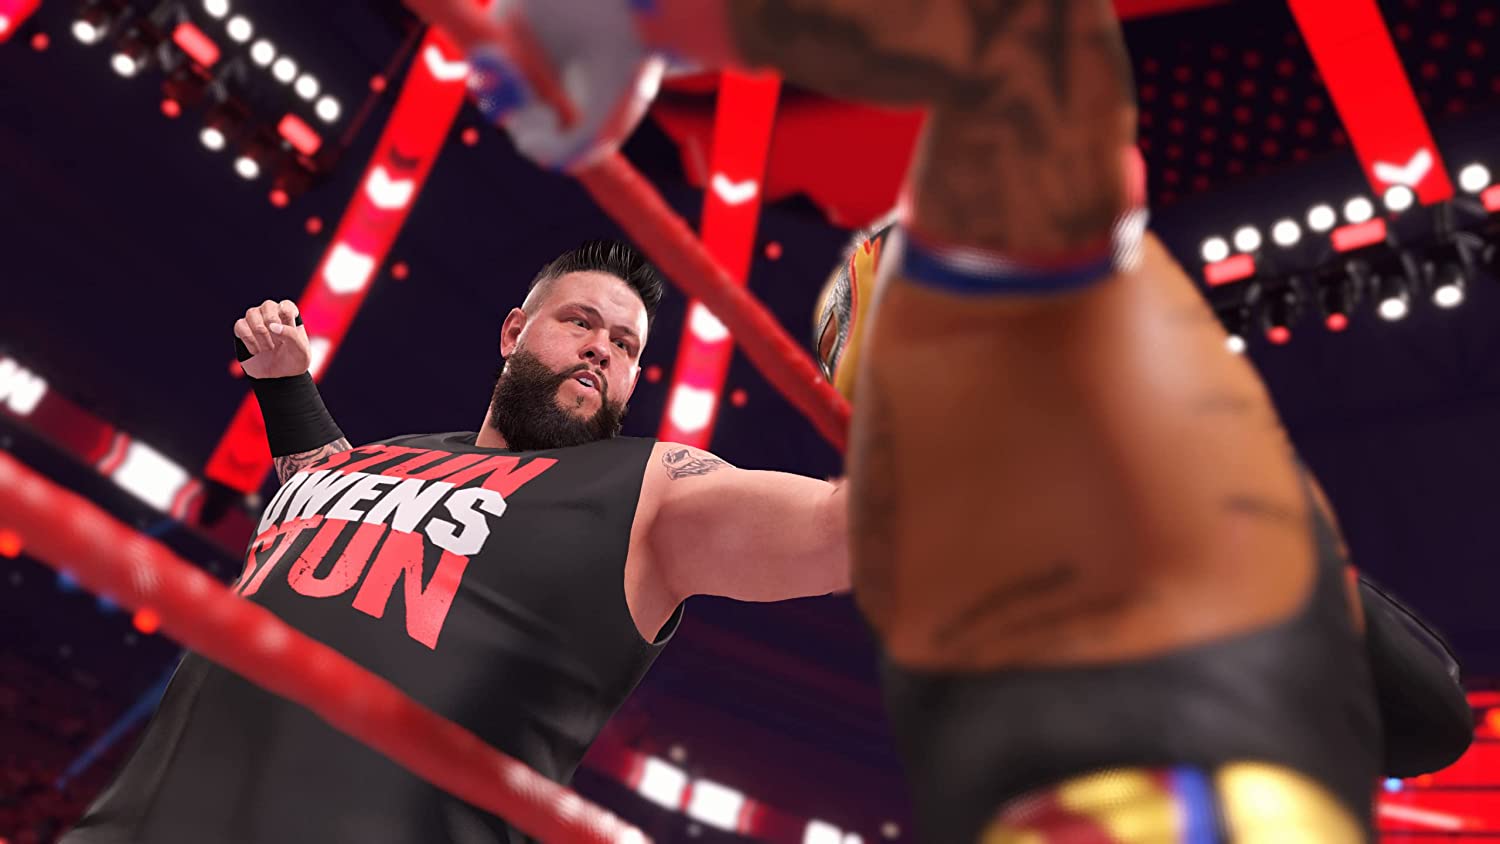 WWE 2K22 Official Roster Fresh Update All Characters So Far! (WWE